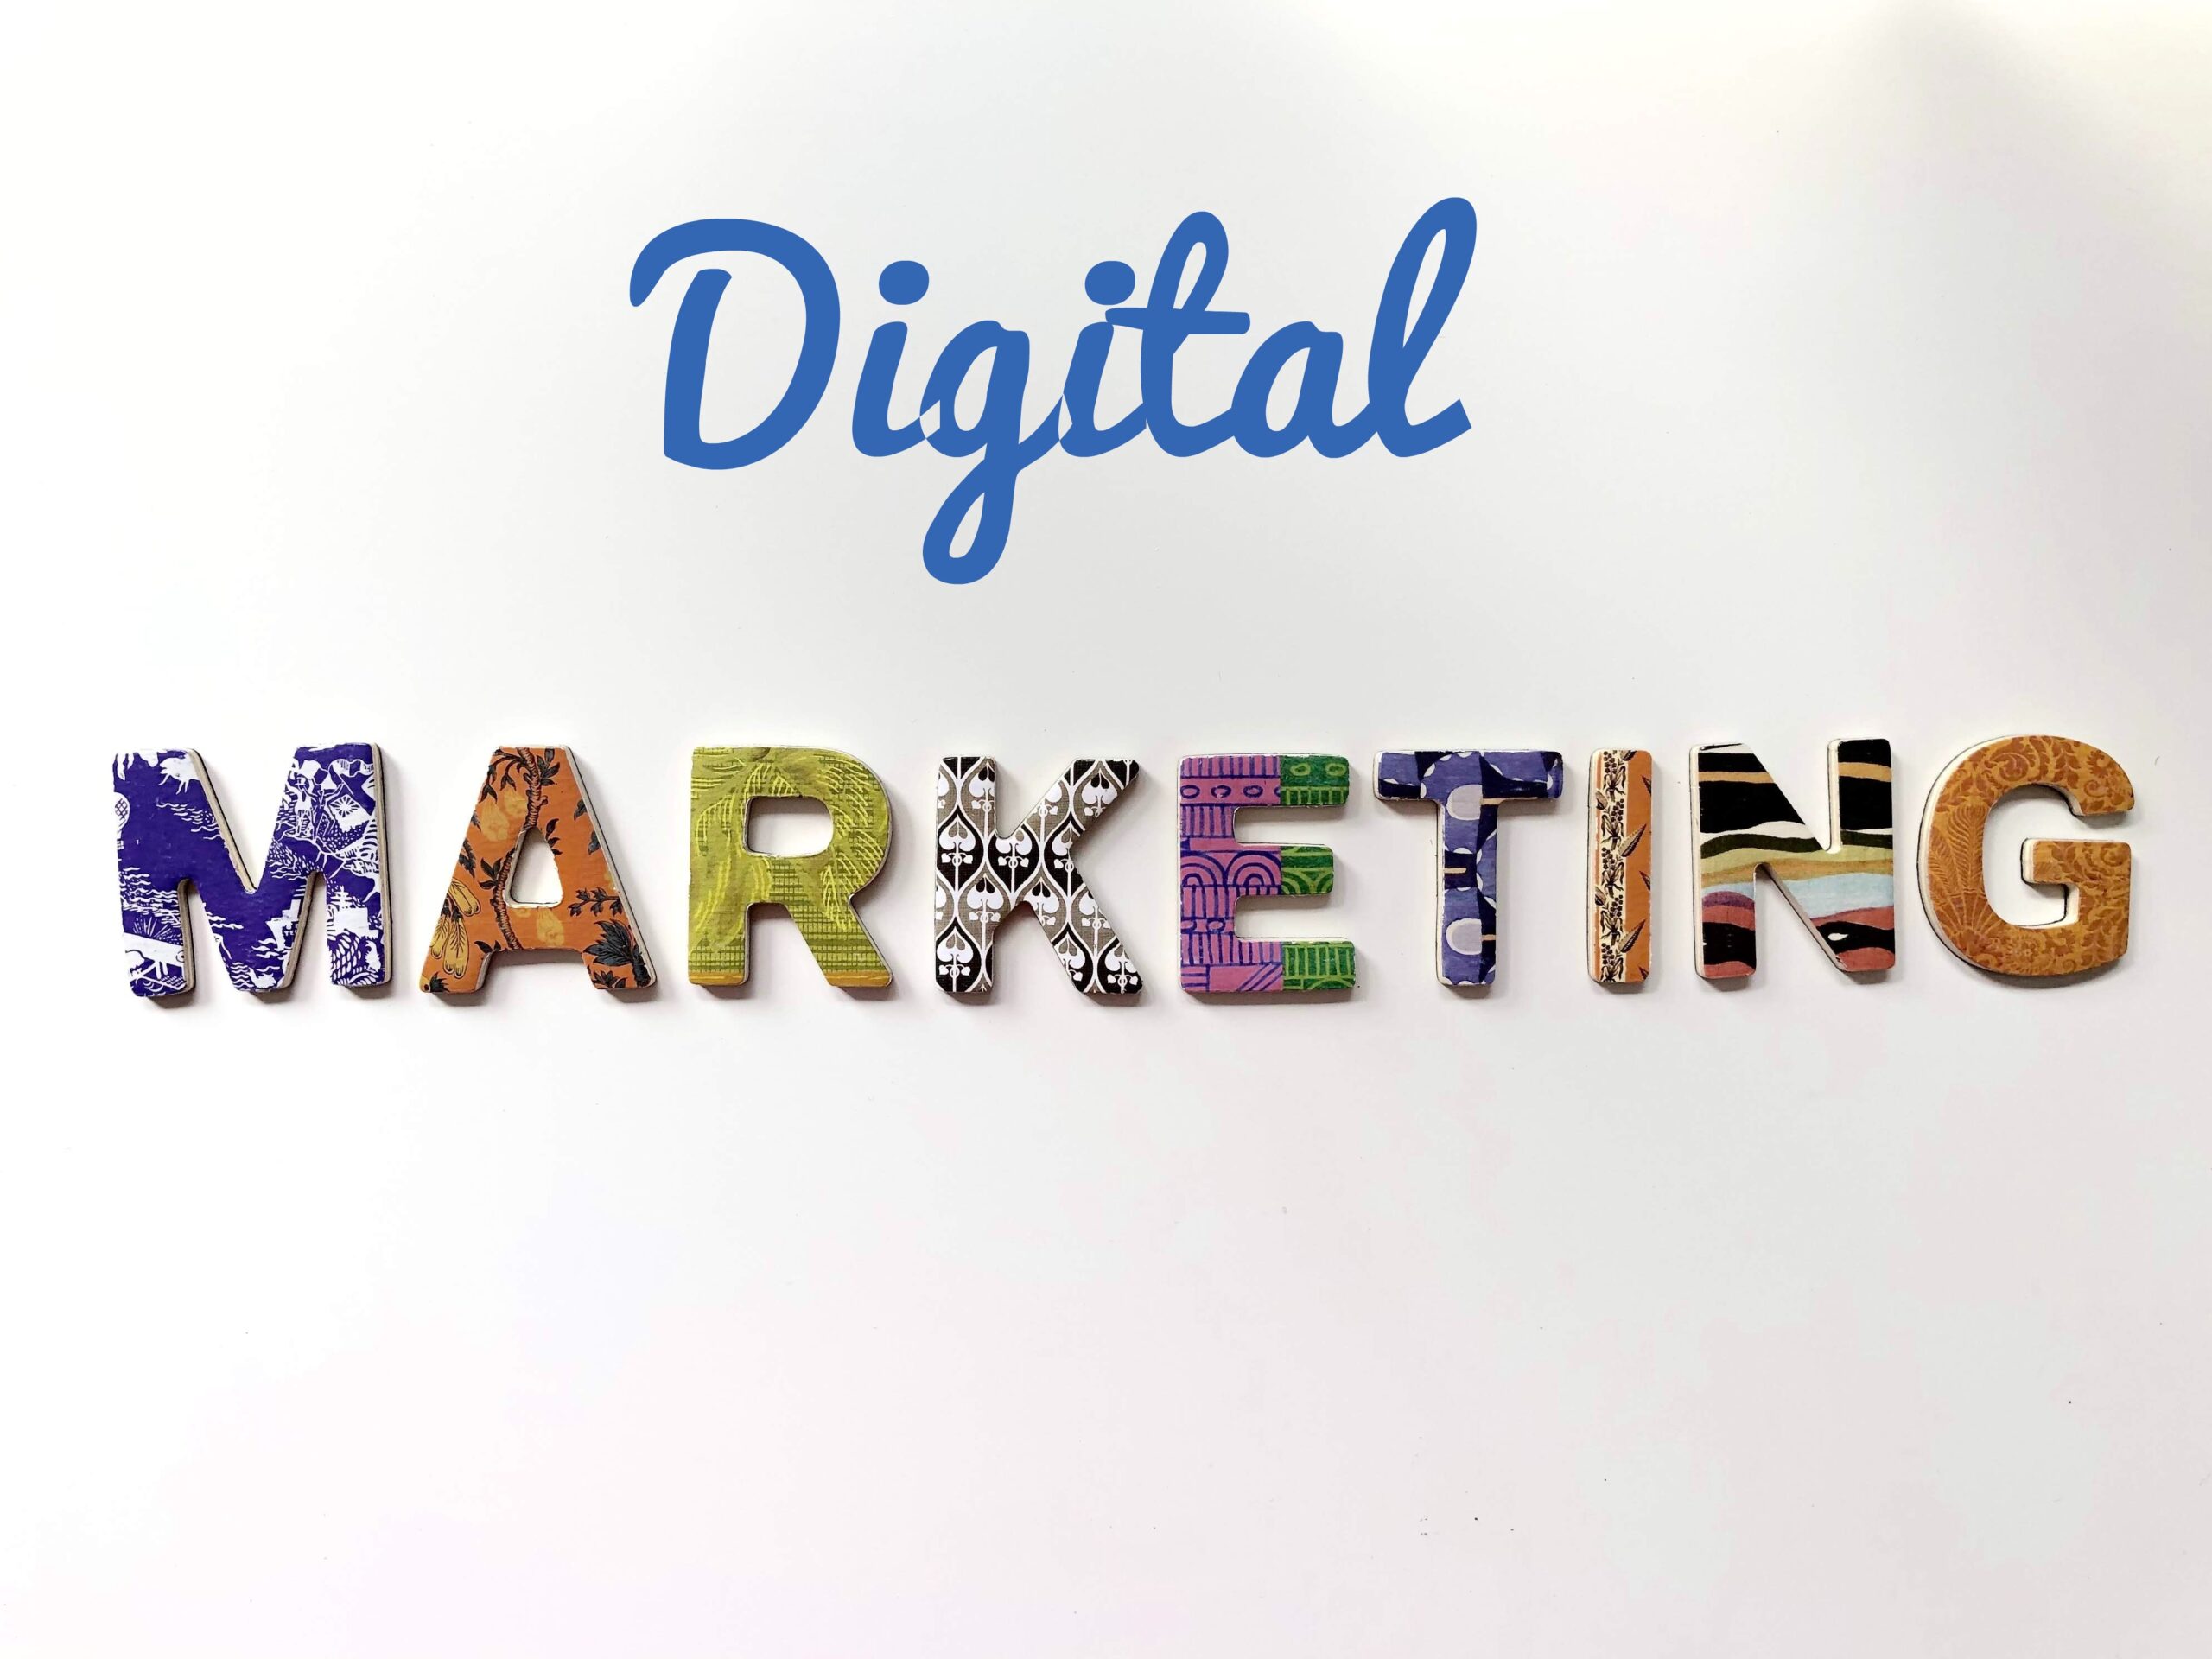 Digital Marketing Ideas to Facilitate your Company’s Growth in 2023